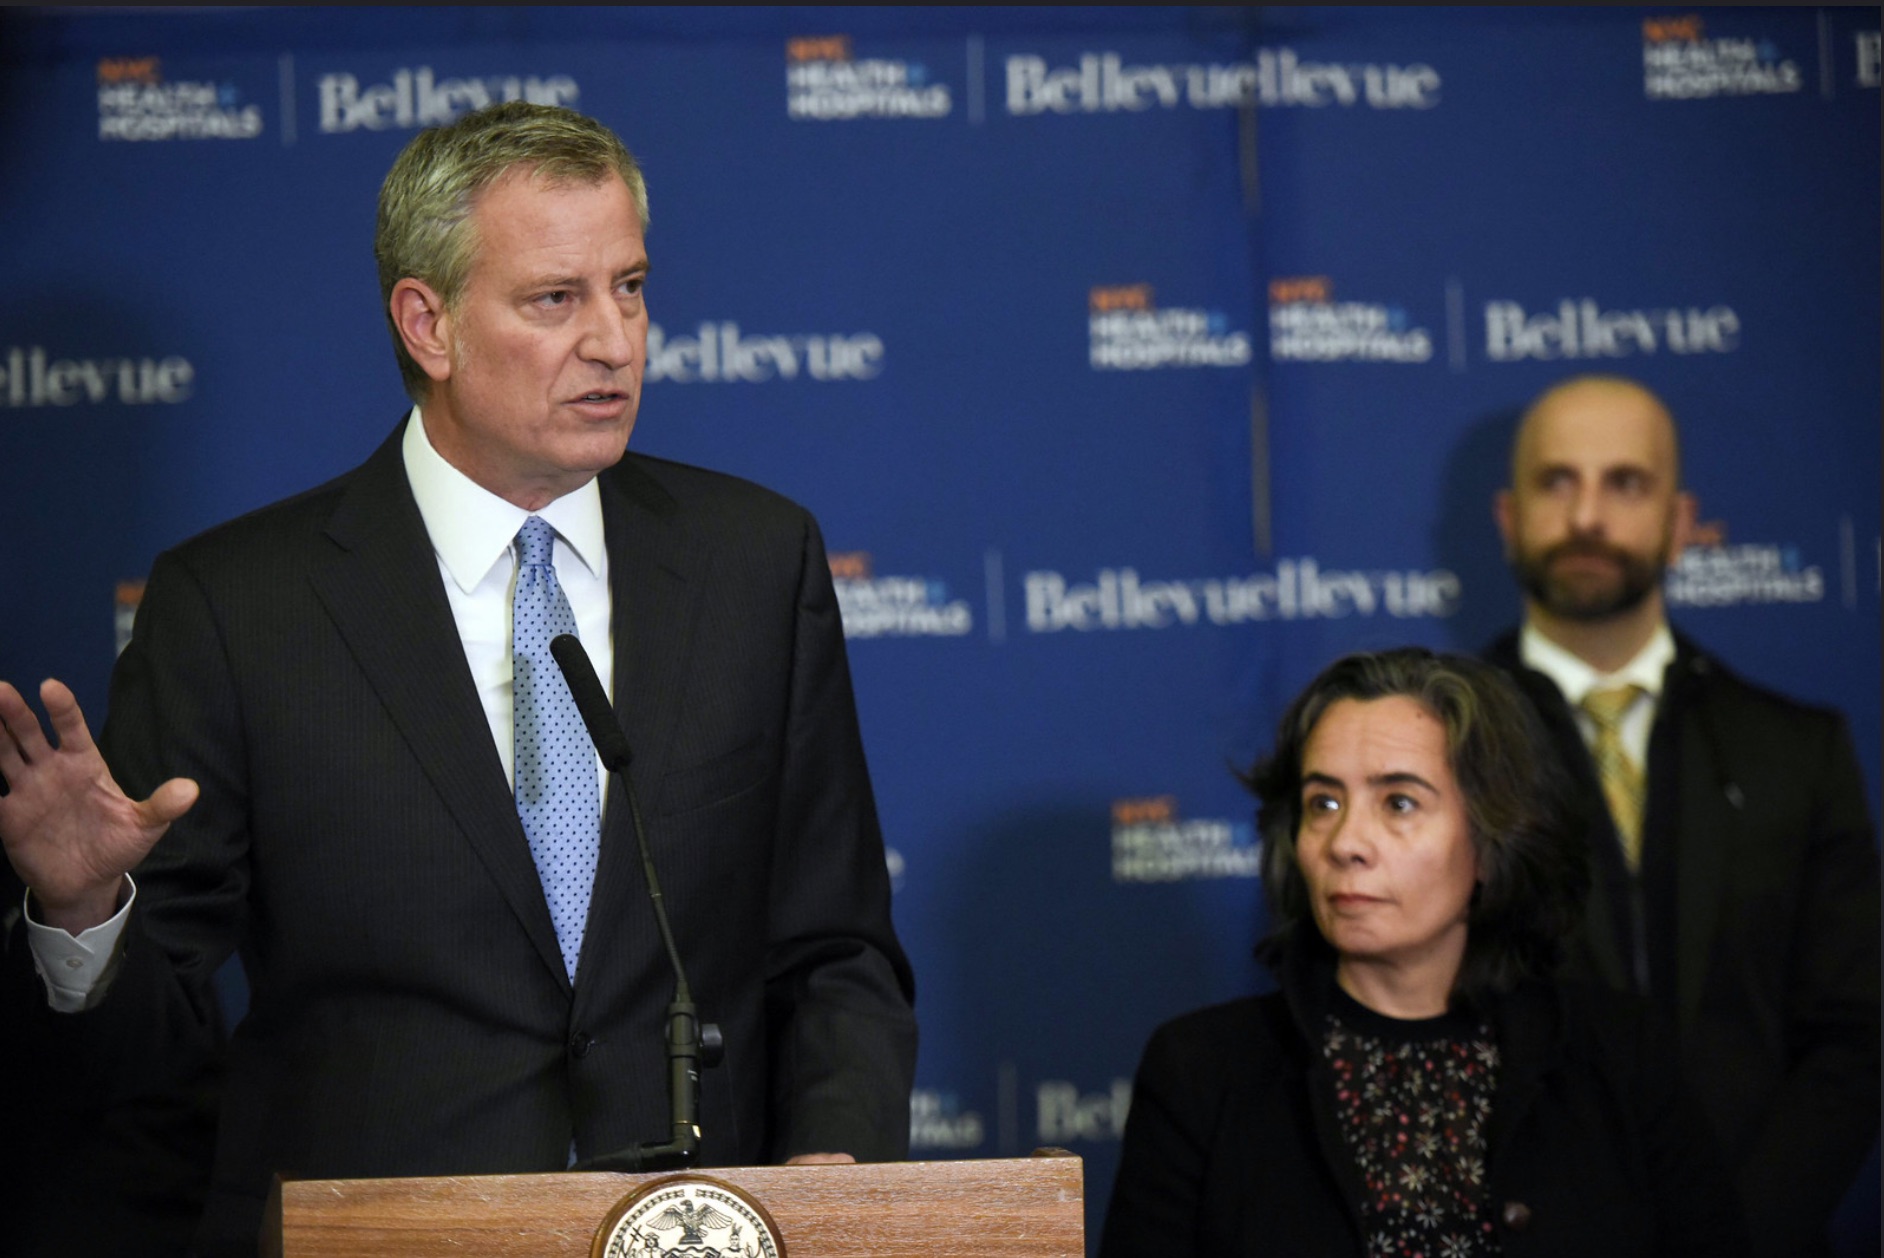 Mayor Bill de Blasio held a press conference to discuss a suspected coronavirus case at Bellevue, a public NYC Health+ Hospital institution in Manhattan on Saturday, February 1, 2020. Photo: Ed Reed/Mayoral Photography Office